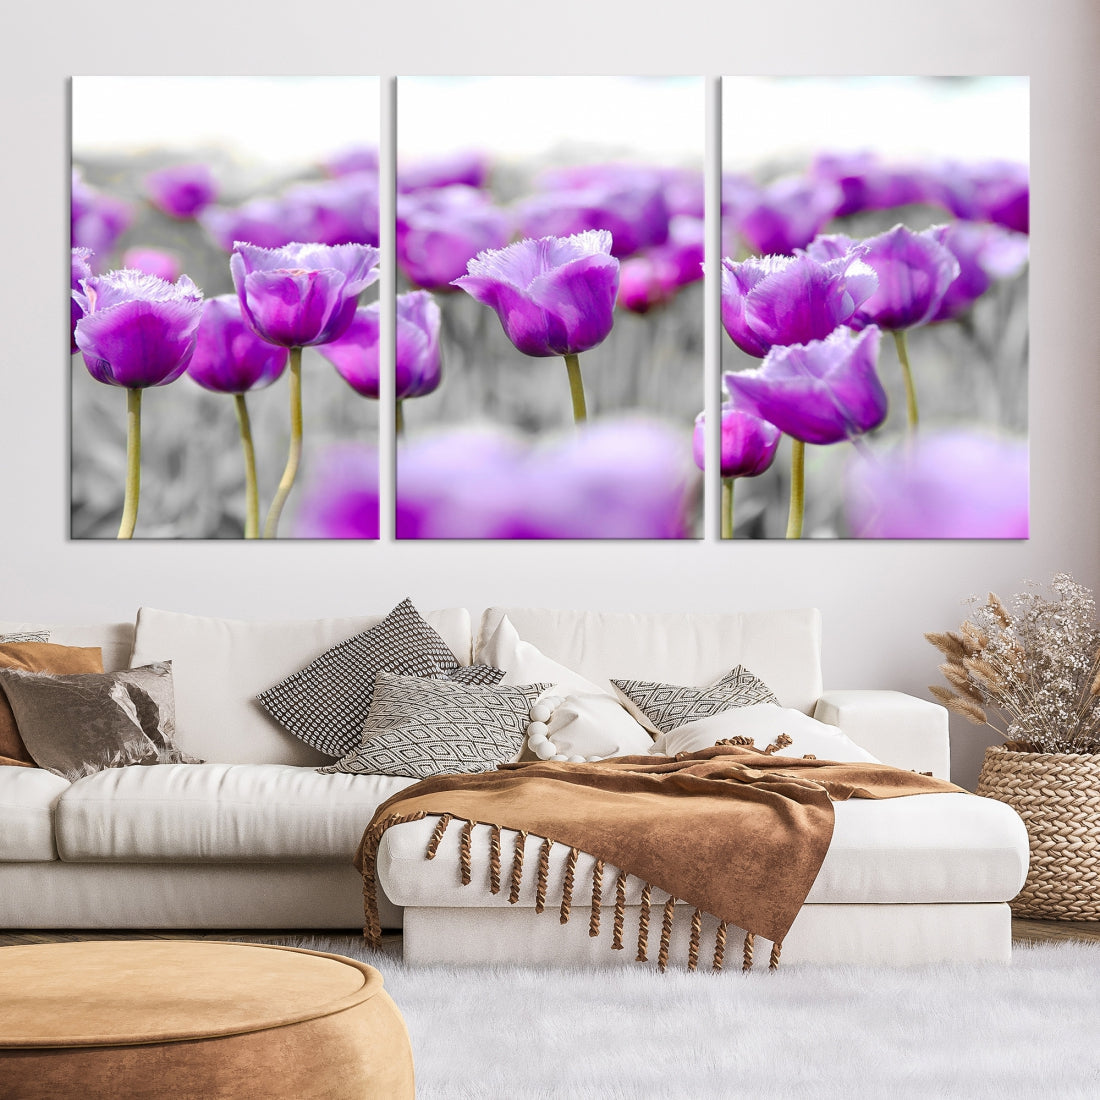 Tulip Fields Canvas Wall Art Print Extra Large Purple Tulips Flower Artwork for Walls